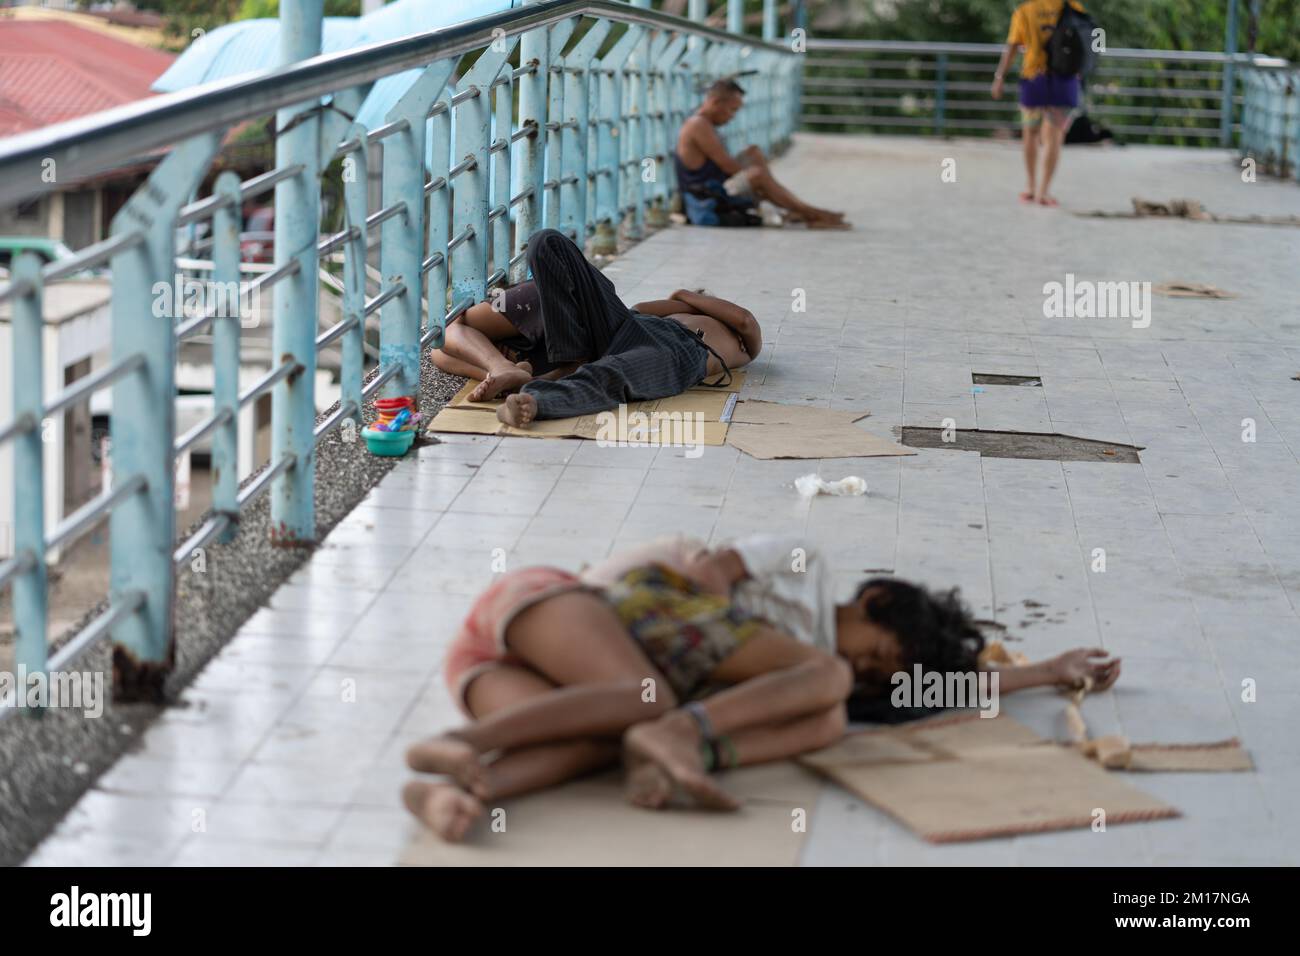 Homeless children on a flyover sleeping on cardboard used as makeshift bedding, Cebu City, Philippines Stock Photo